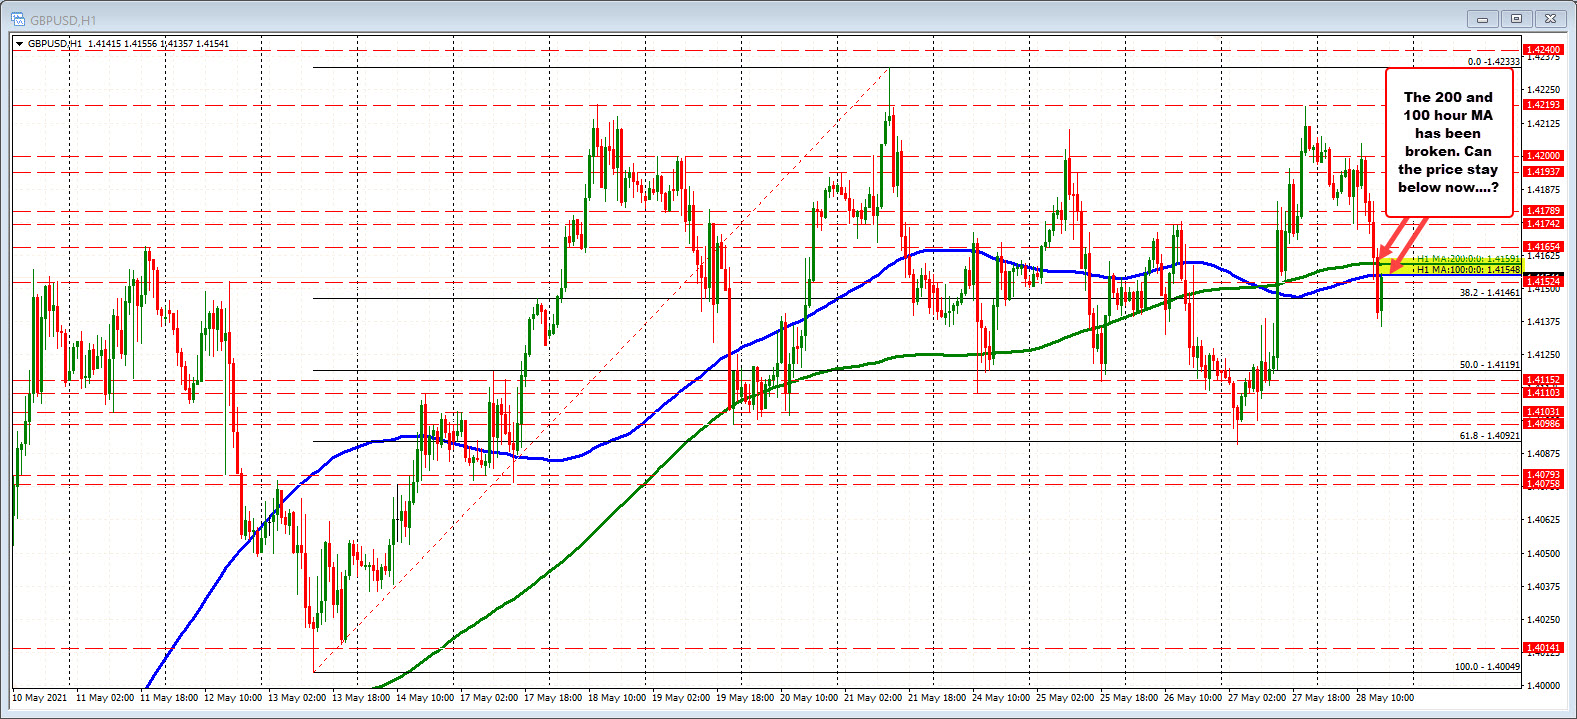 Narrow trading range for the week of 128 pips_